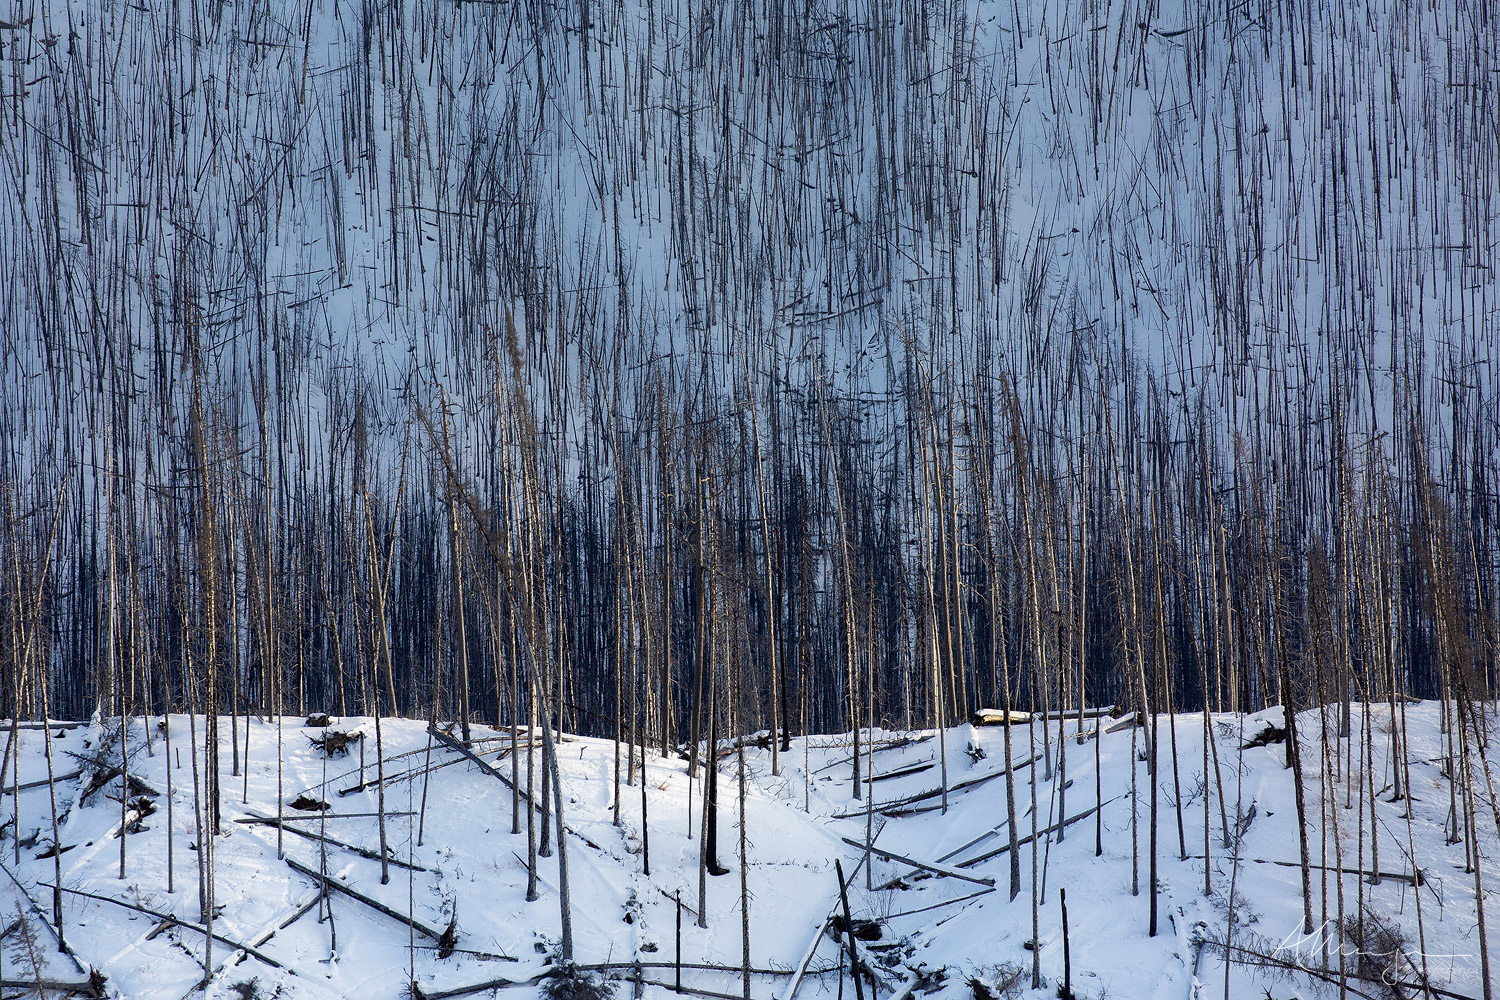 Fire charred trees stand, like tiny matchsticks covering the slopes of the Canadian Rocky Mountains.